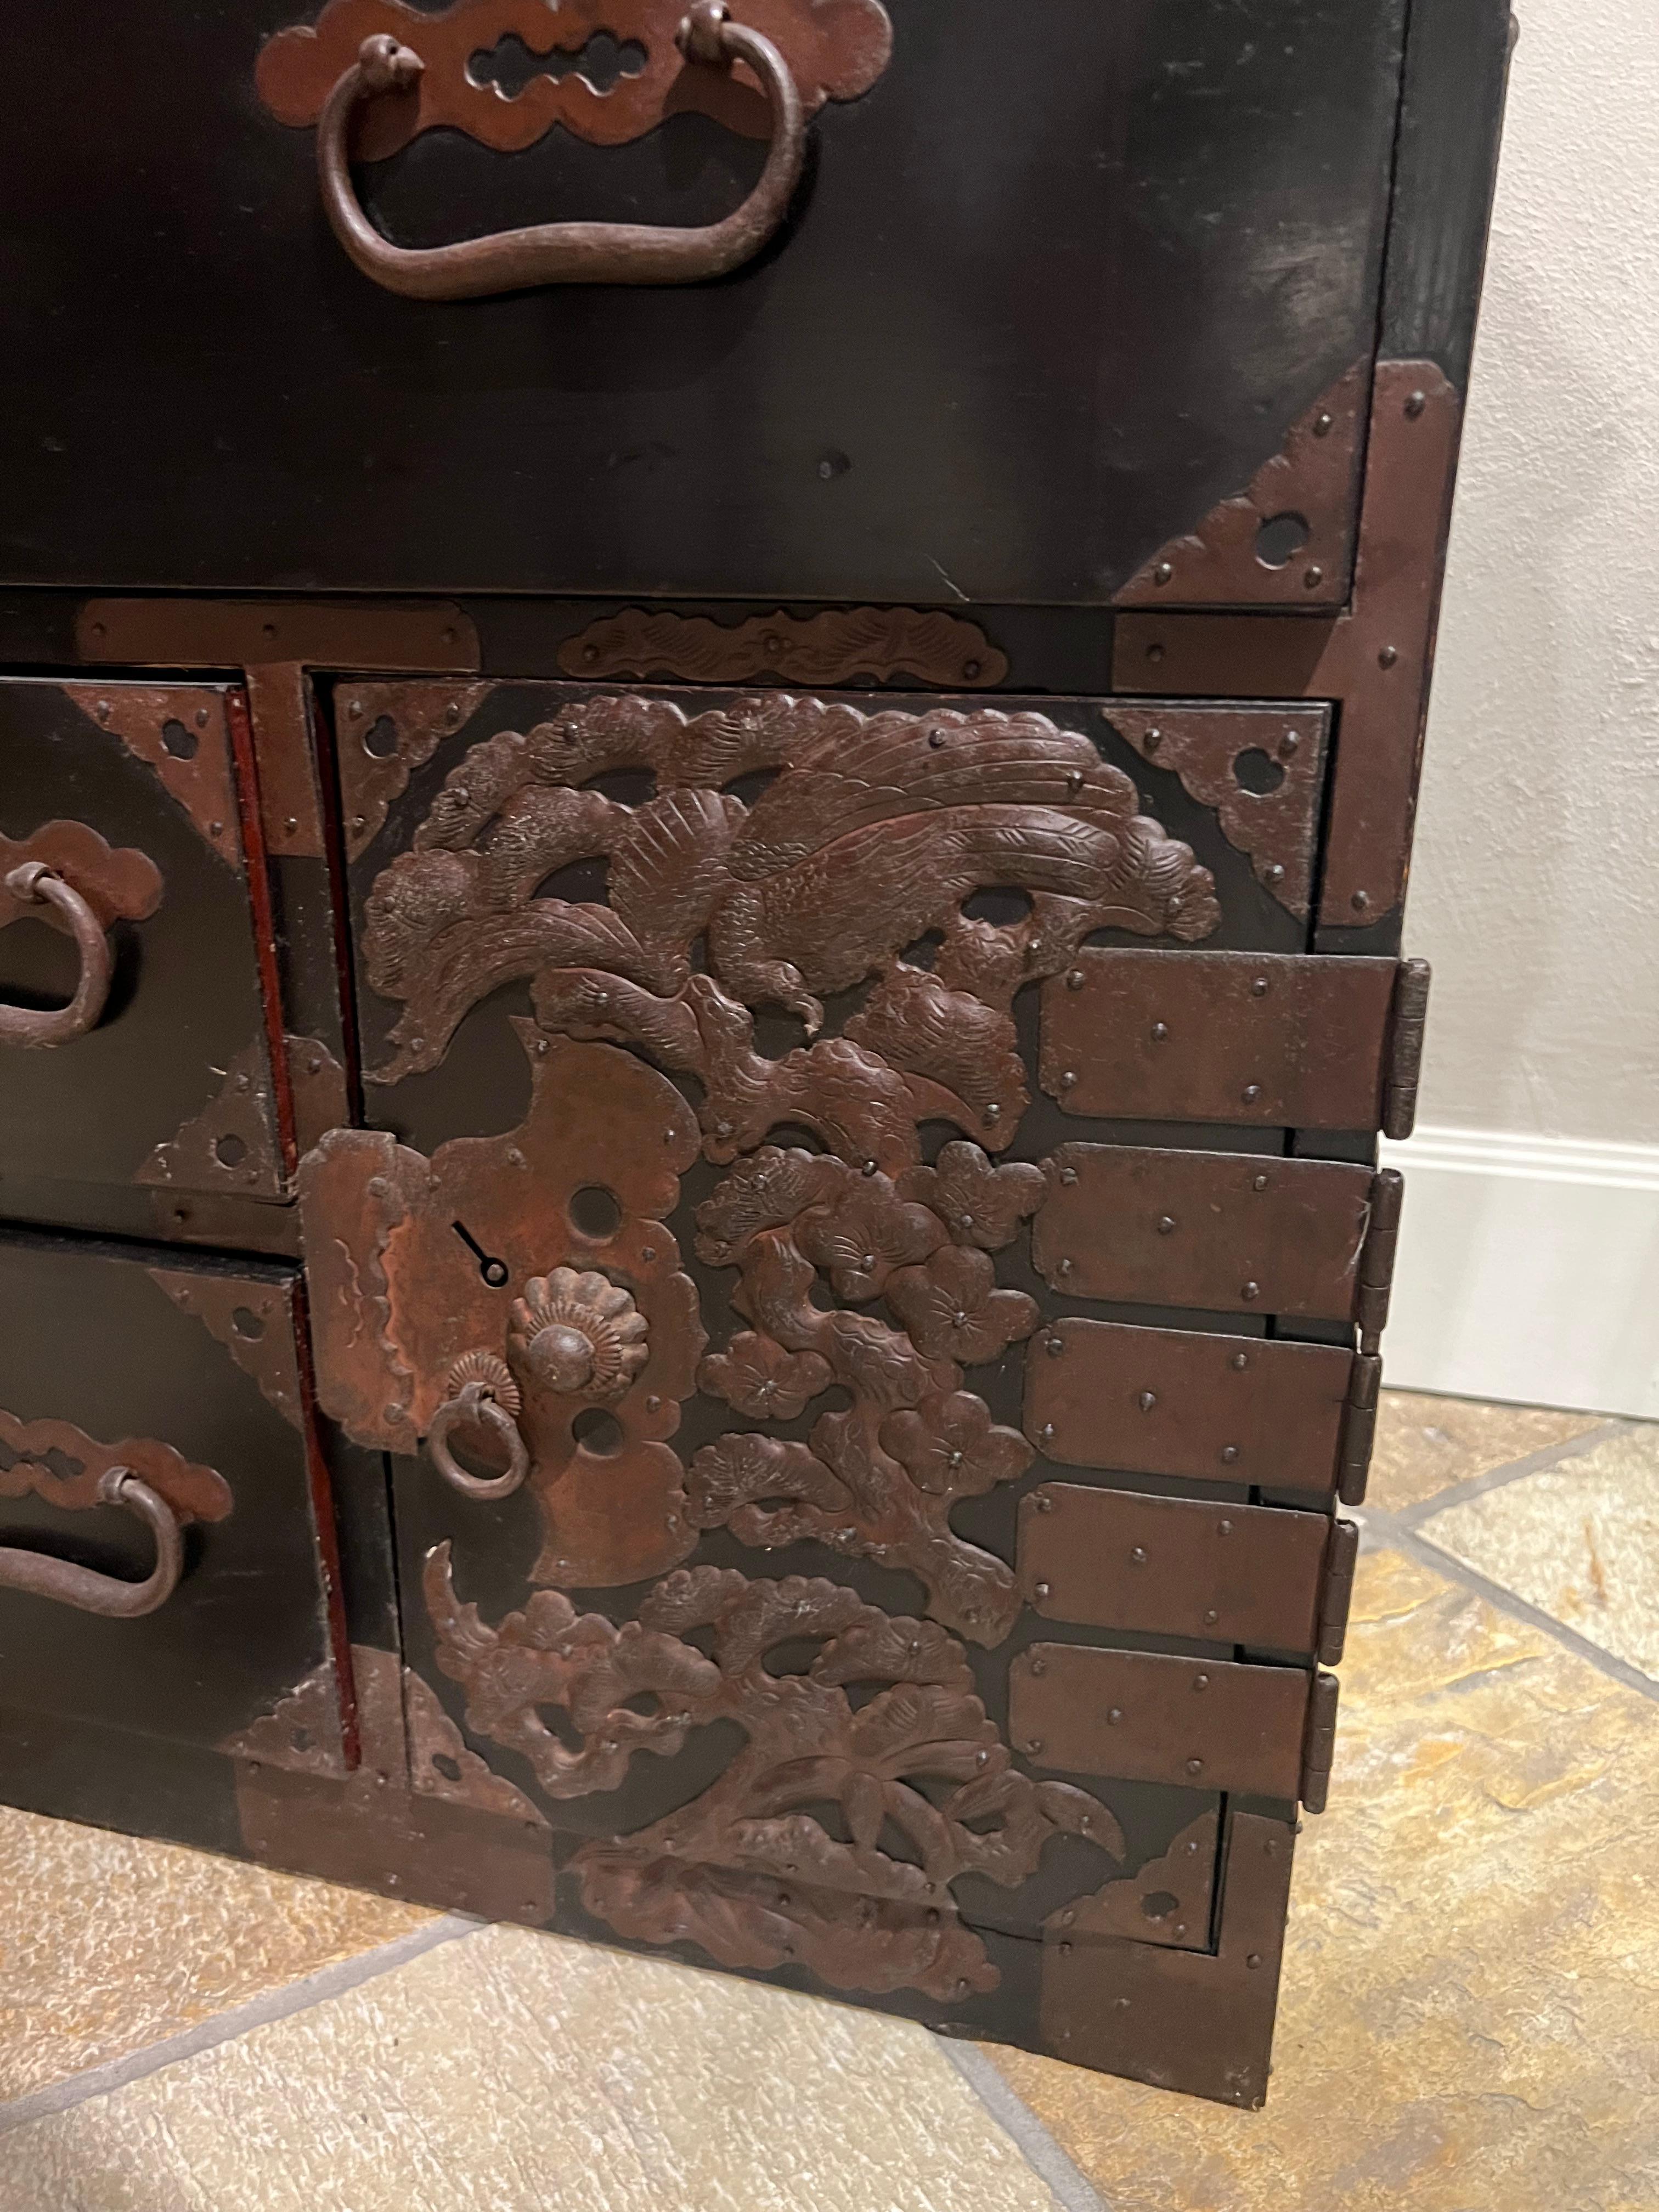 This early 20th century Japanese clothing chest from Sado Island produced in the late Meiji Era. It consists of two pieces decorated with very elaborate metalwork covering the front.
It consists of two overlapping parts that can be easily separated